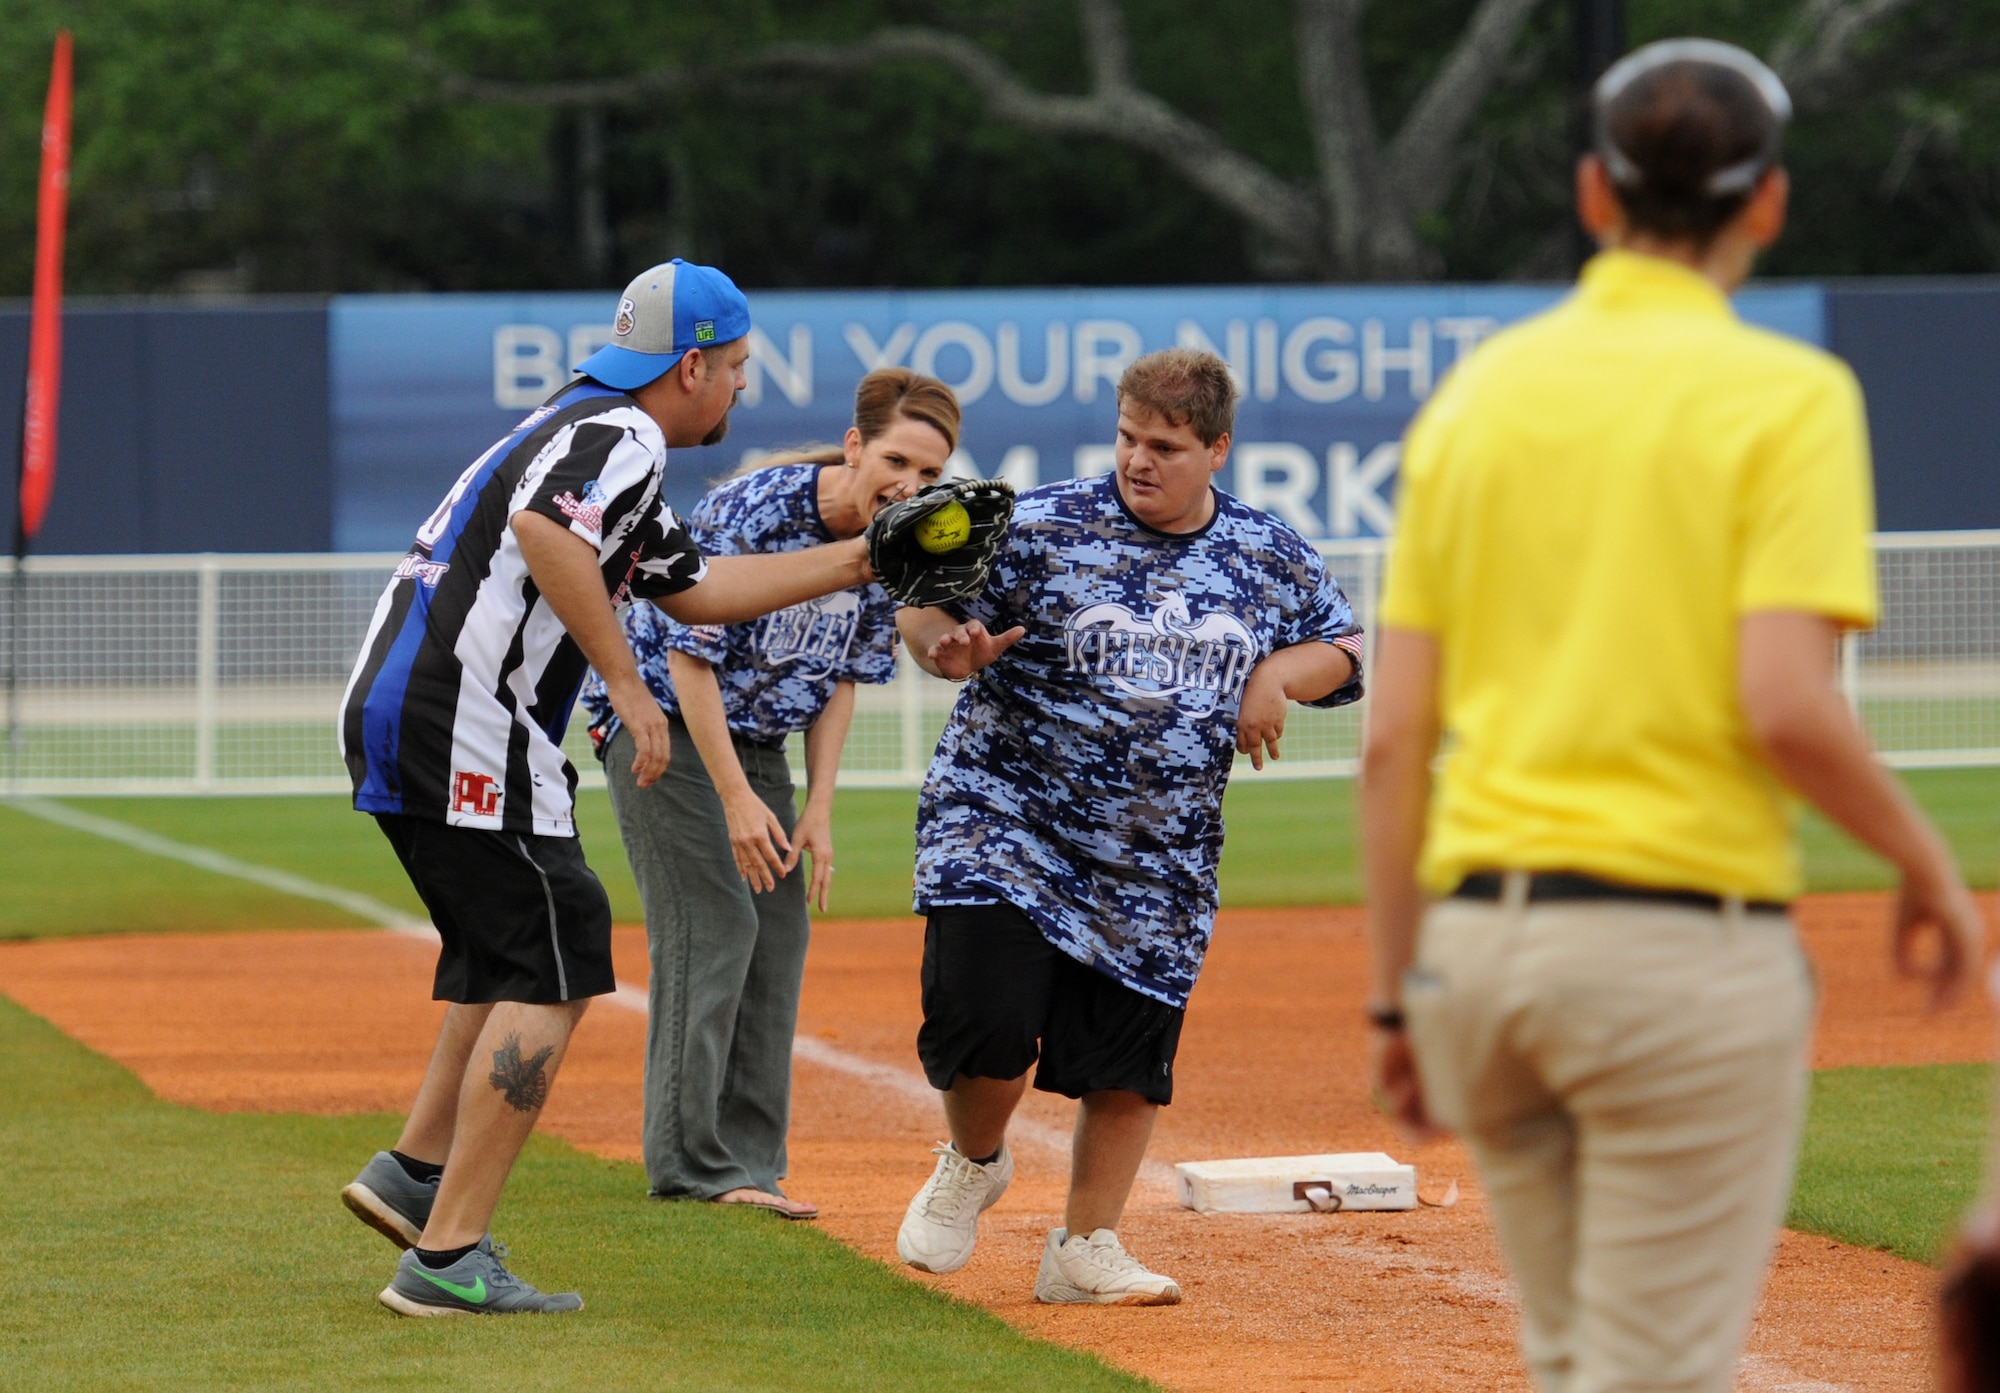 Zachery Cerone, Special Olympics athlete, rounds third base during the “Boots versus Badges” softball game at the Biloxi Shuckers MGM Park April 21, 2016, Biloxi, Miss. The game was the kickoff event for the 2016 Special Olympics Mississippi Summer Games, which will be hosted by Keesler Air Force Base, Miss., May 20-21. (U.S. Air Force photo by Kemberly Groue)